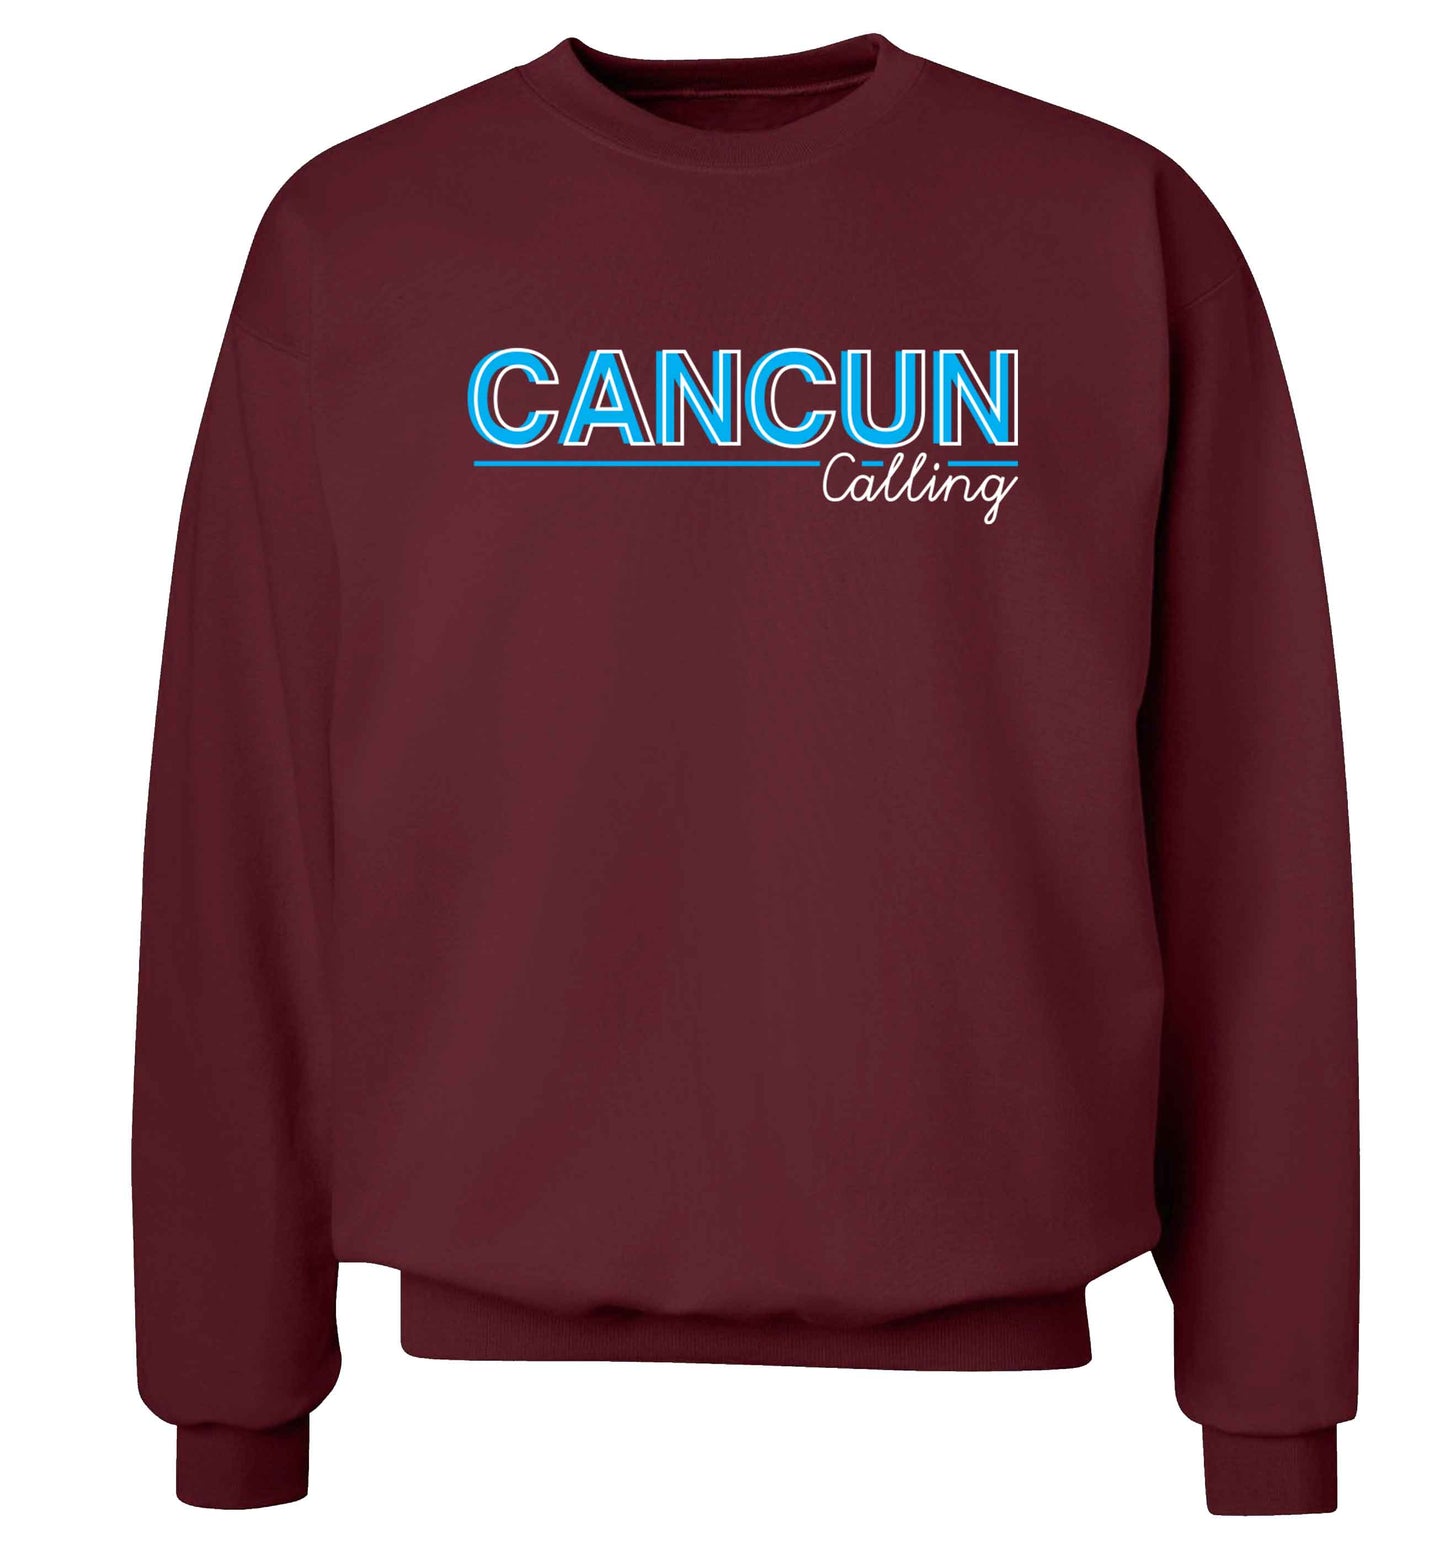 Cancun calling Adult's unisex maroon Sweater 2XL